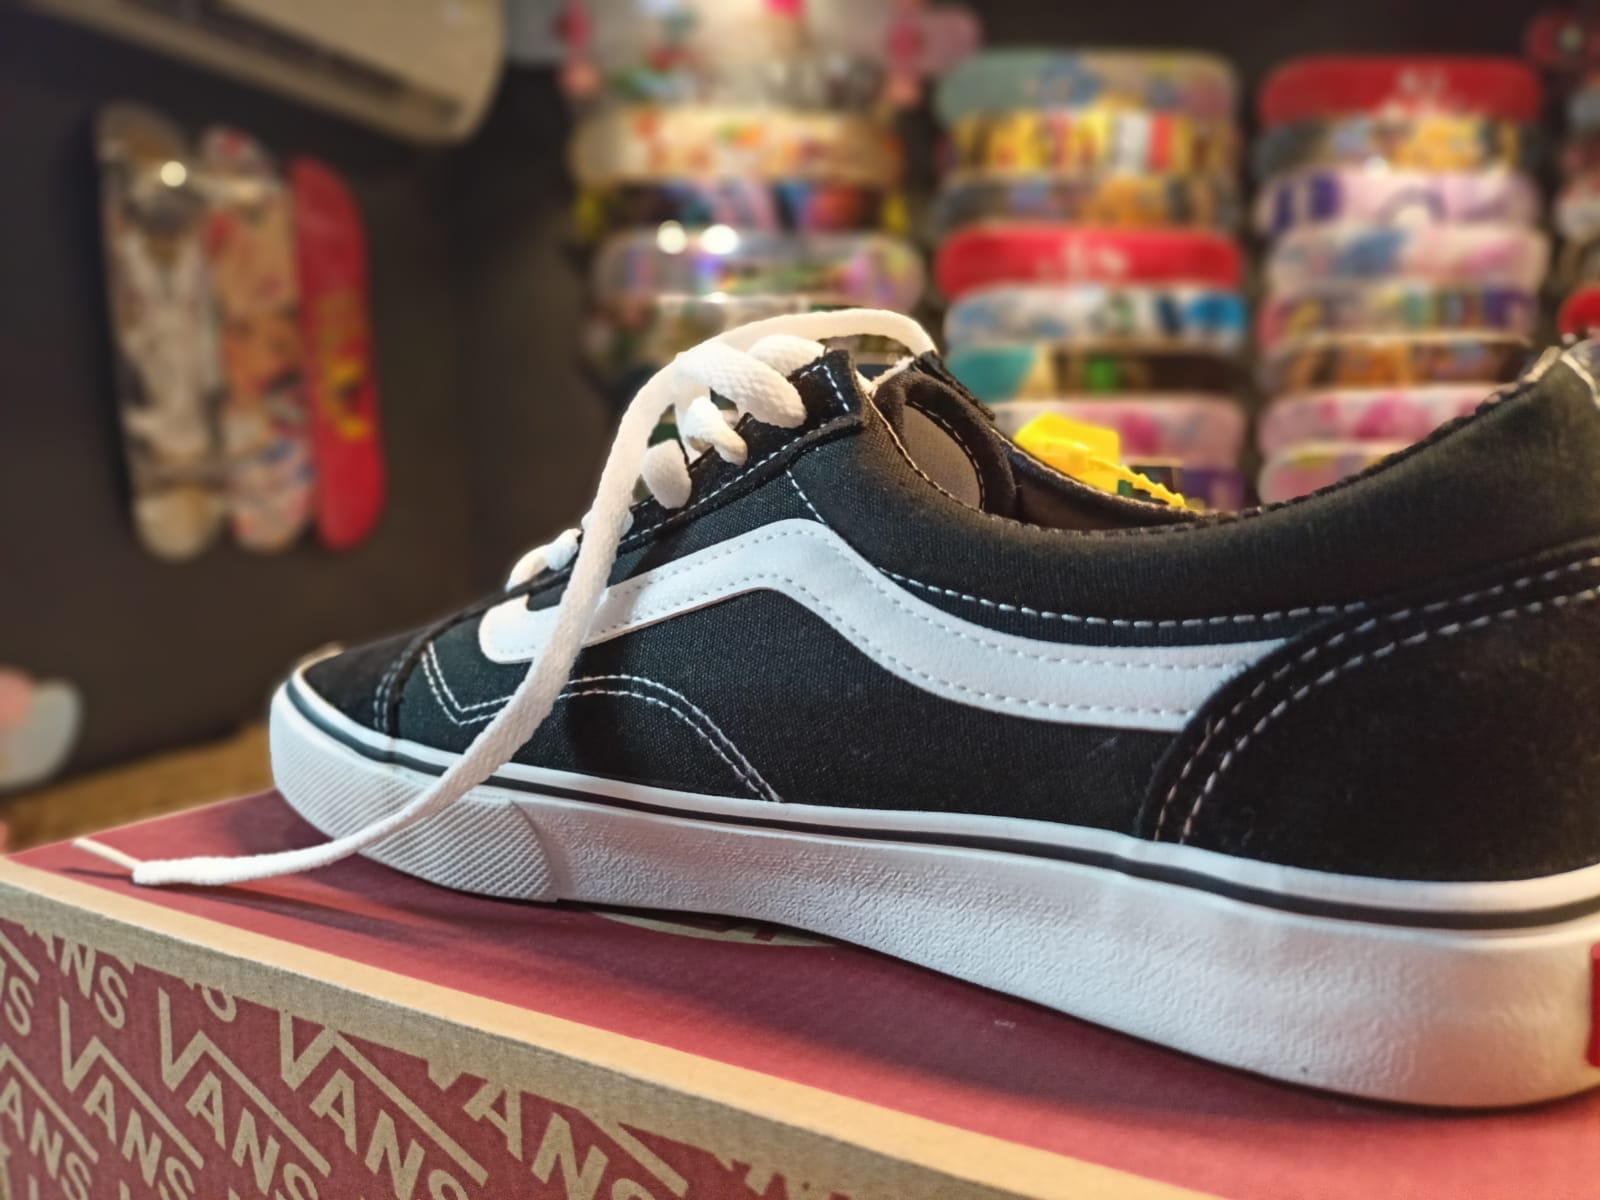 Are there any iconic Vans skate shoe models that every skater should know about?